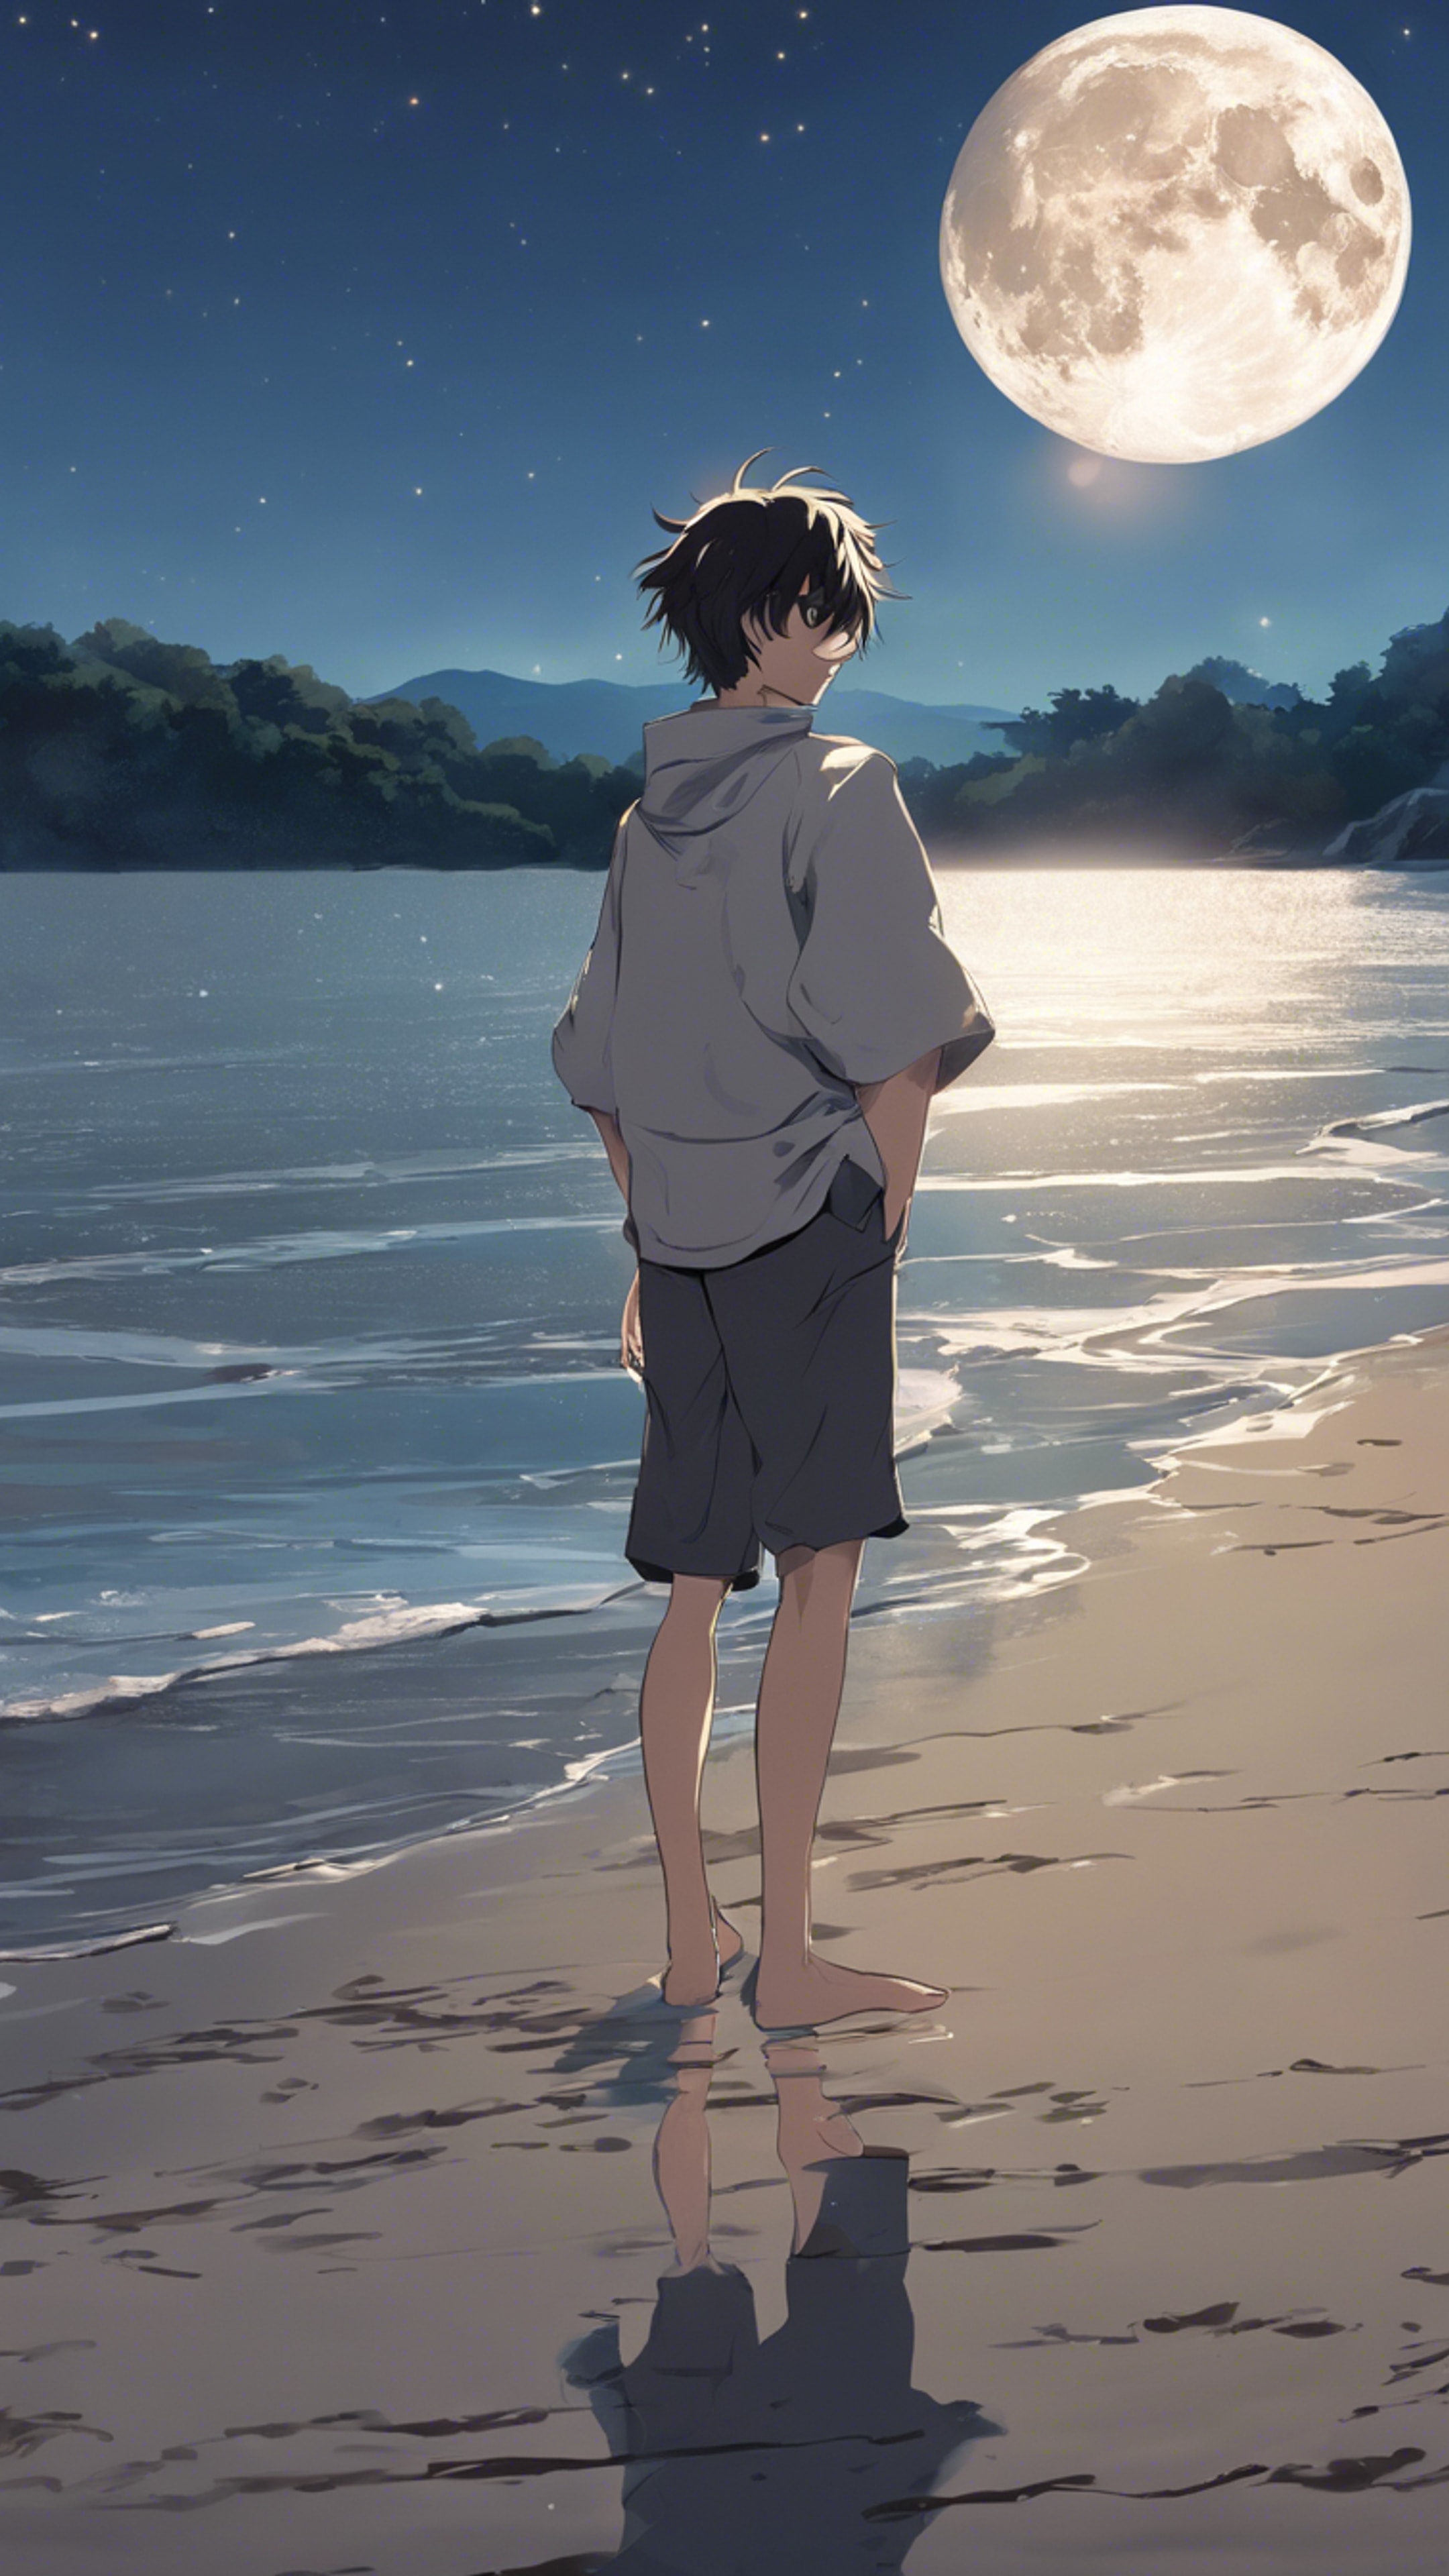 An anime boy standing barefoot on the shore, with the moon reflecting in upturned, joyous eyes. Fond d'écran[a80f9c3e465041ad9759]